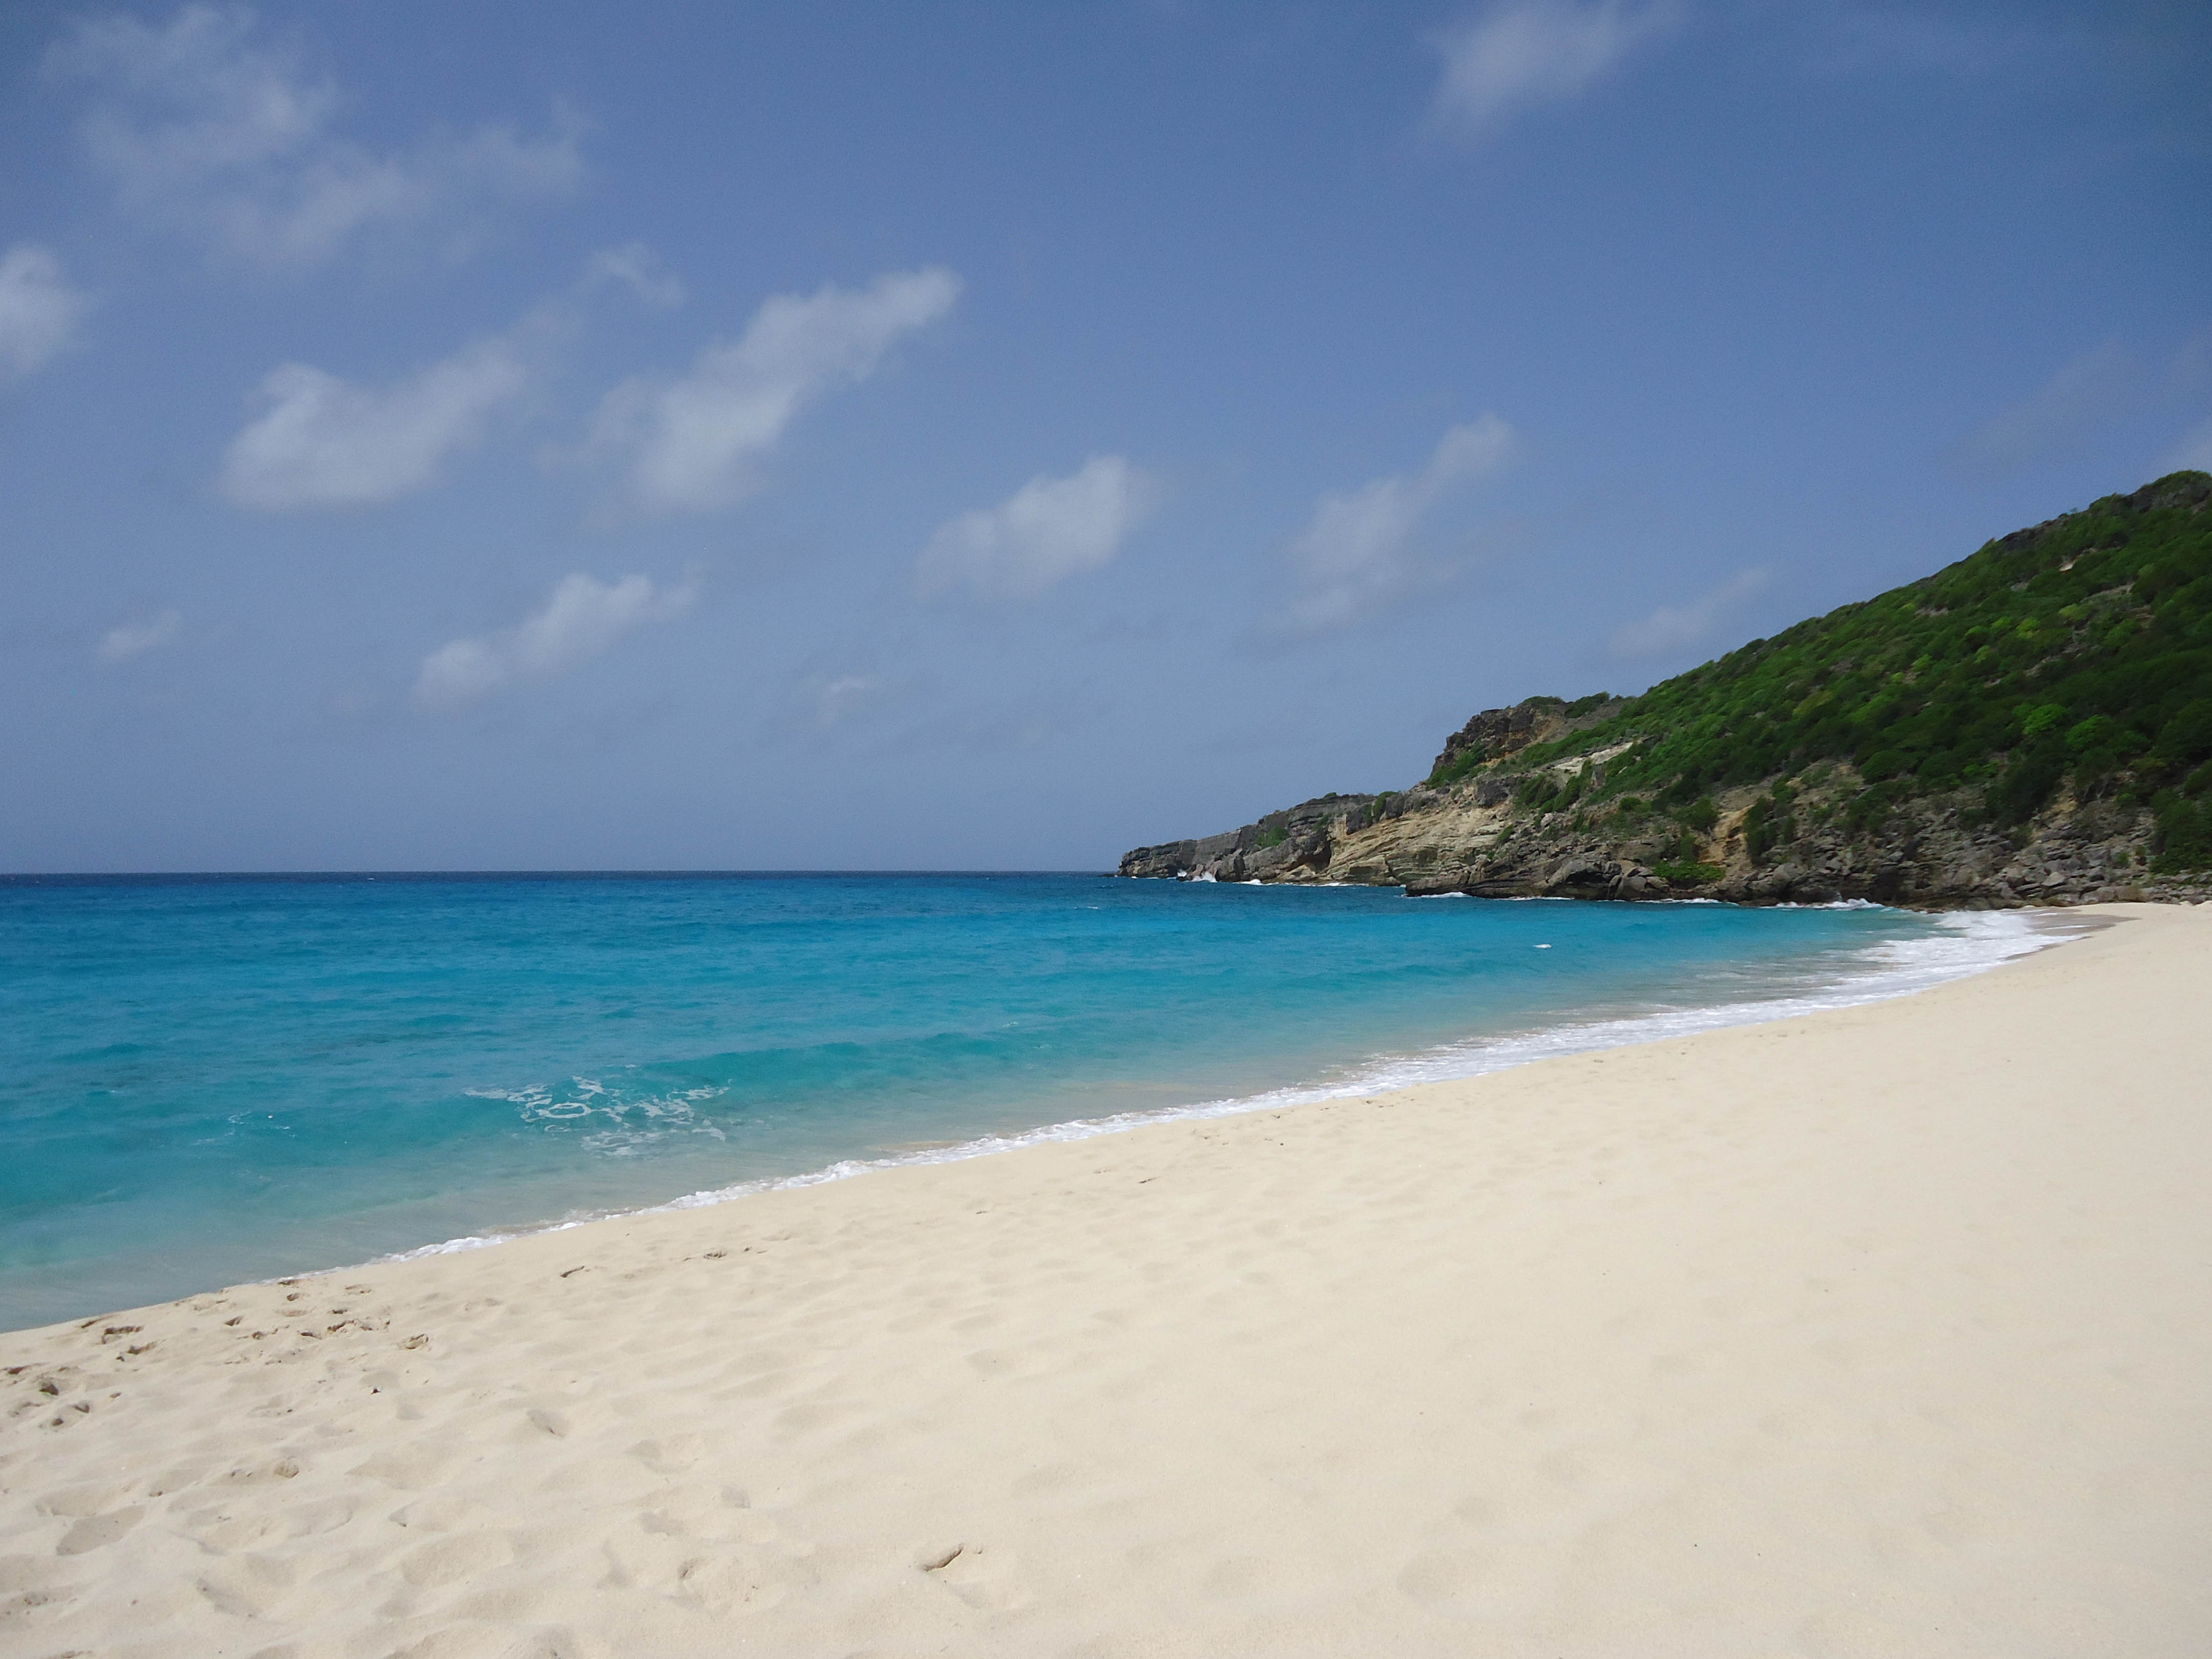 The 6 Best Beaches in St Barts - 83037